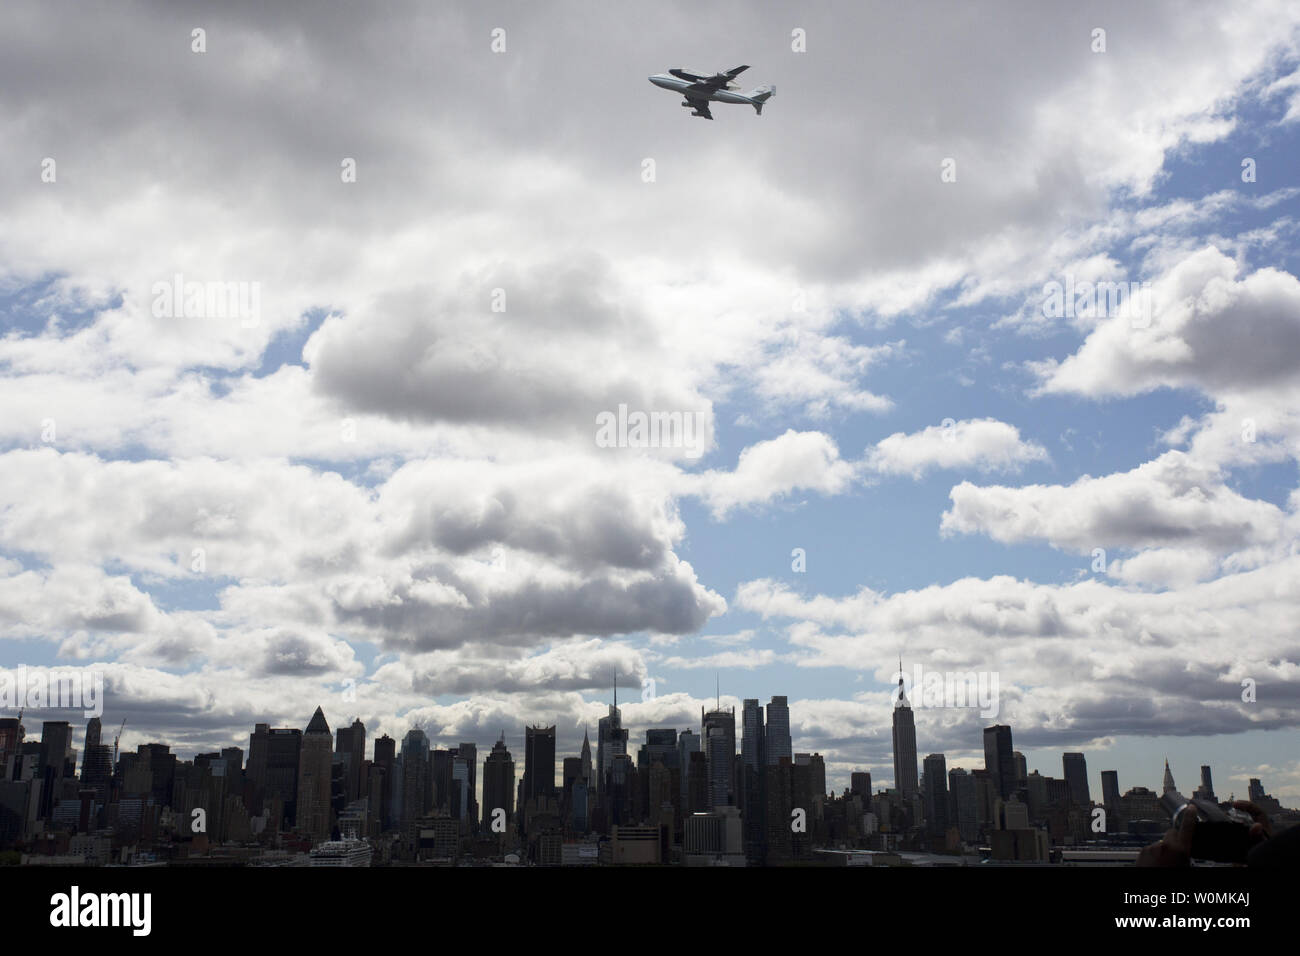 Space shuttle Enterprise, mounted atop a NASA 747 Shuttle Carrier Aircraft (SCA), is seen as it flies over the Hudson River, April 27, 2012, in New York. Enterprise was the first shuttle orbiter built for NASA performing test flights in the atmosphere and was incapable of spaceflight. Originally housed at the Smithsonian's Steven F. Udvar-Hazy Center, Enterprise will be demated from the SCA and placed on a barge that will eventually be moved by tugboat up the Hudson River to the Intrepid Sea, Air & Space Museum in June. UPI/NASA/Matt Hedges Stock Photo